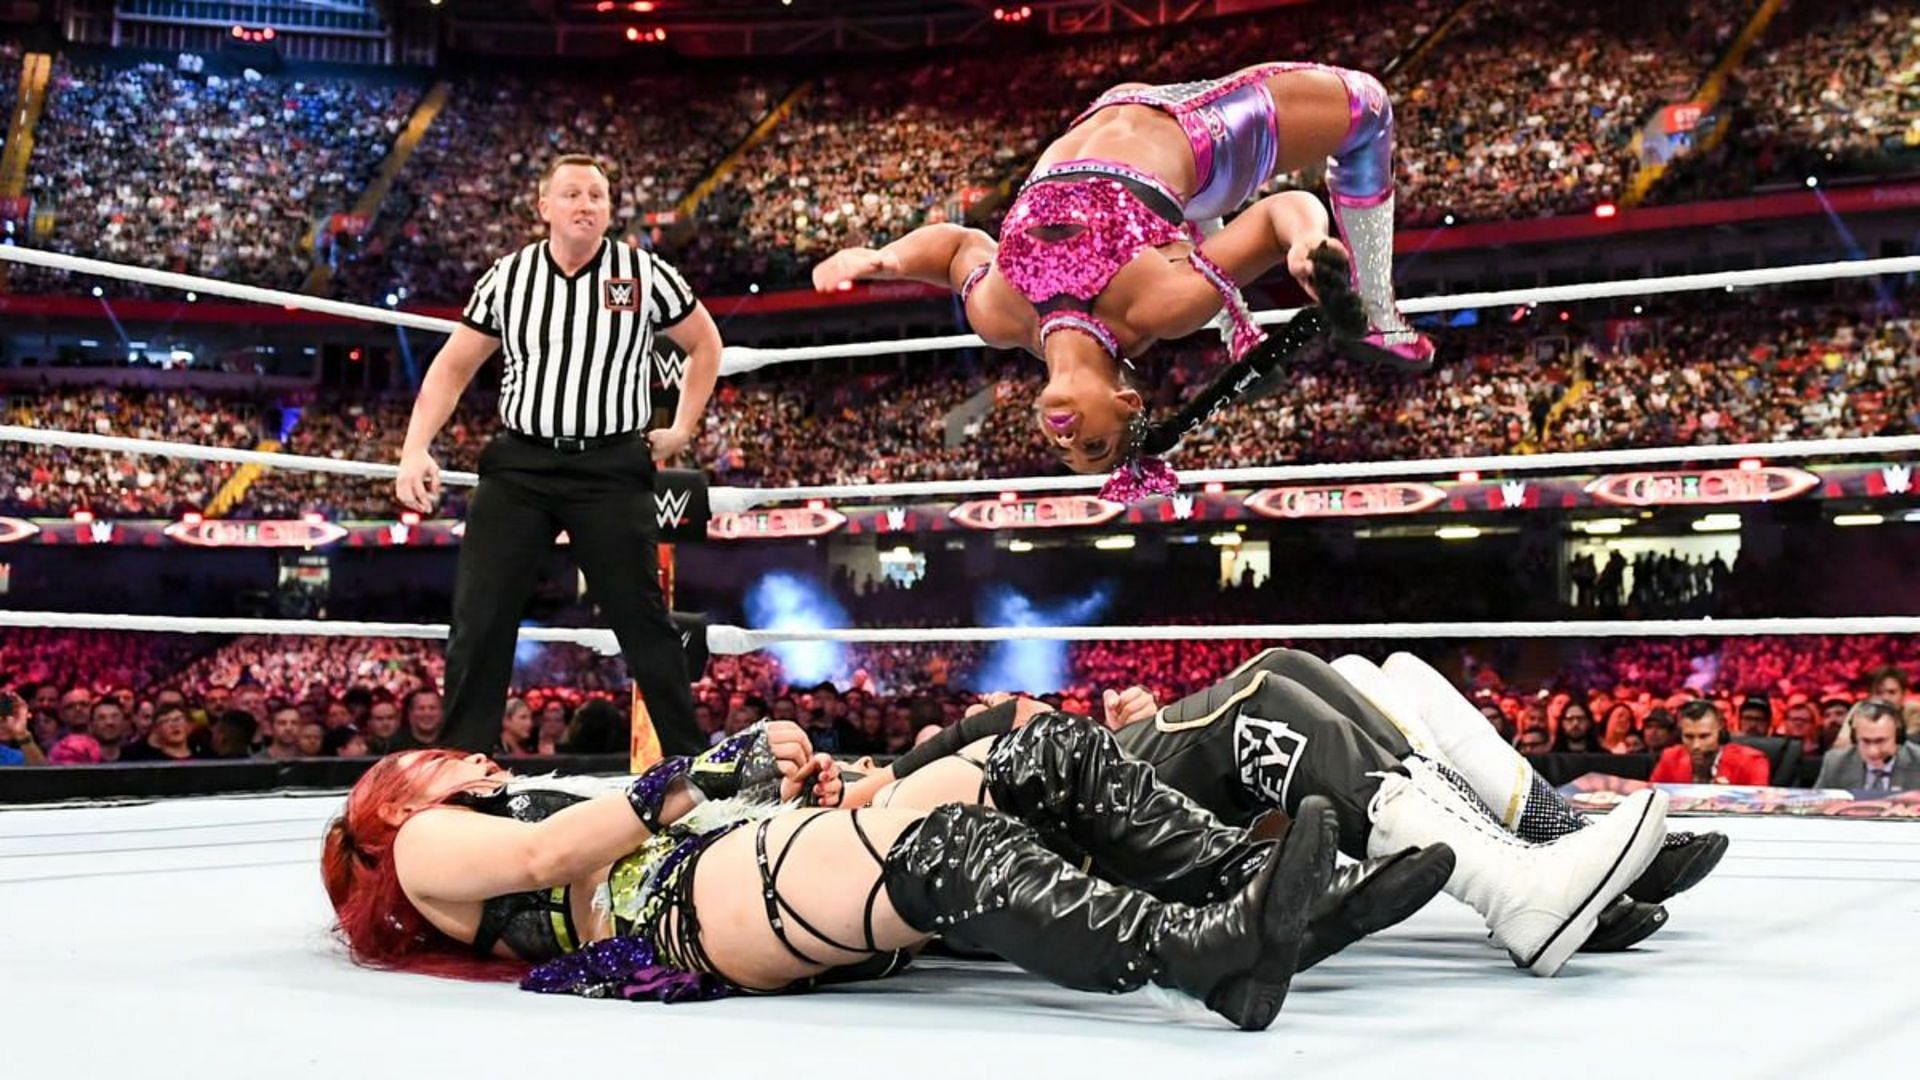 Bianca Belair delivering a Moonsault at Clash at the Castle